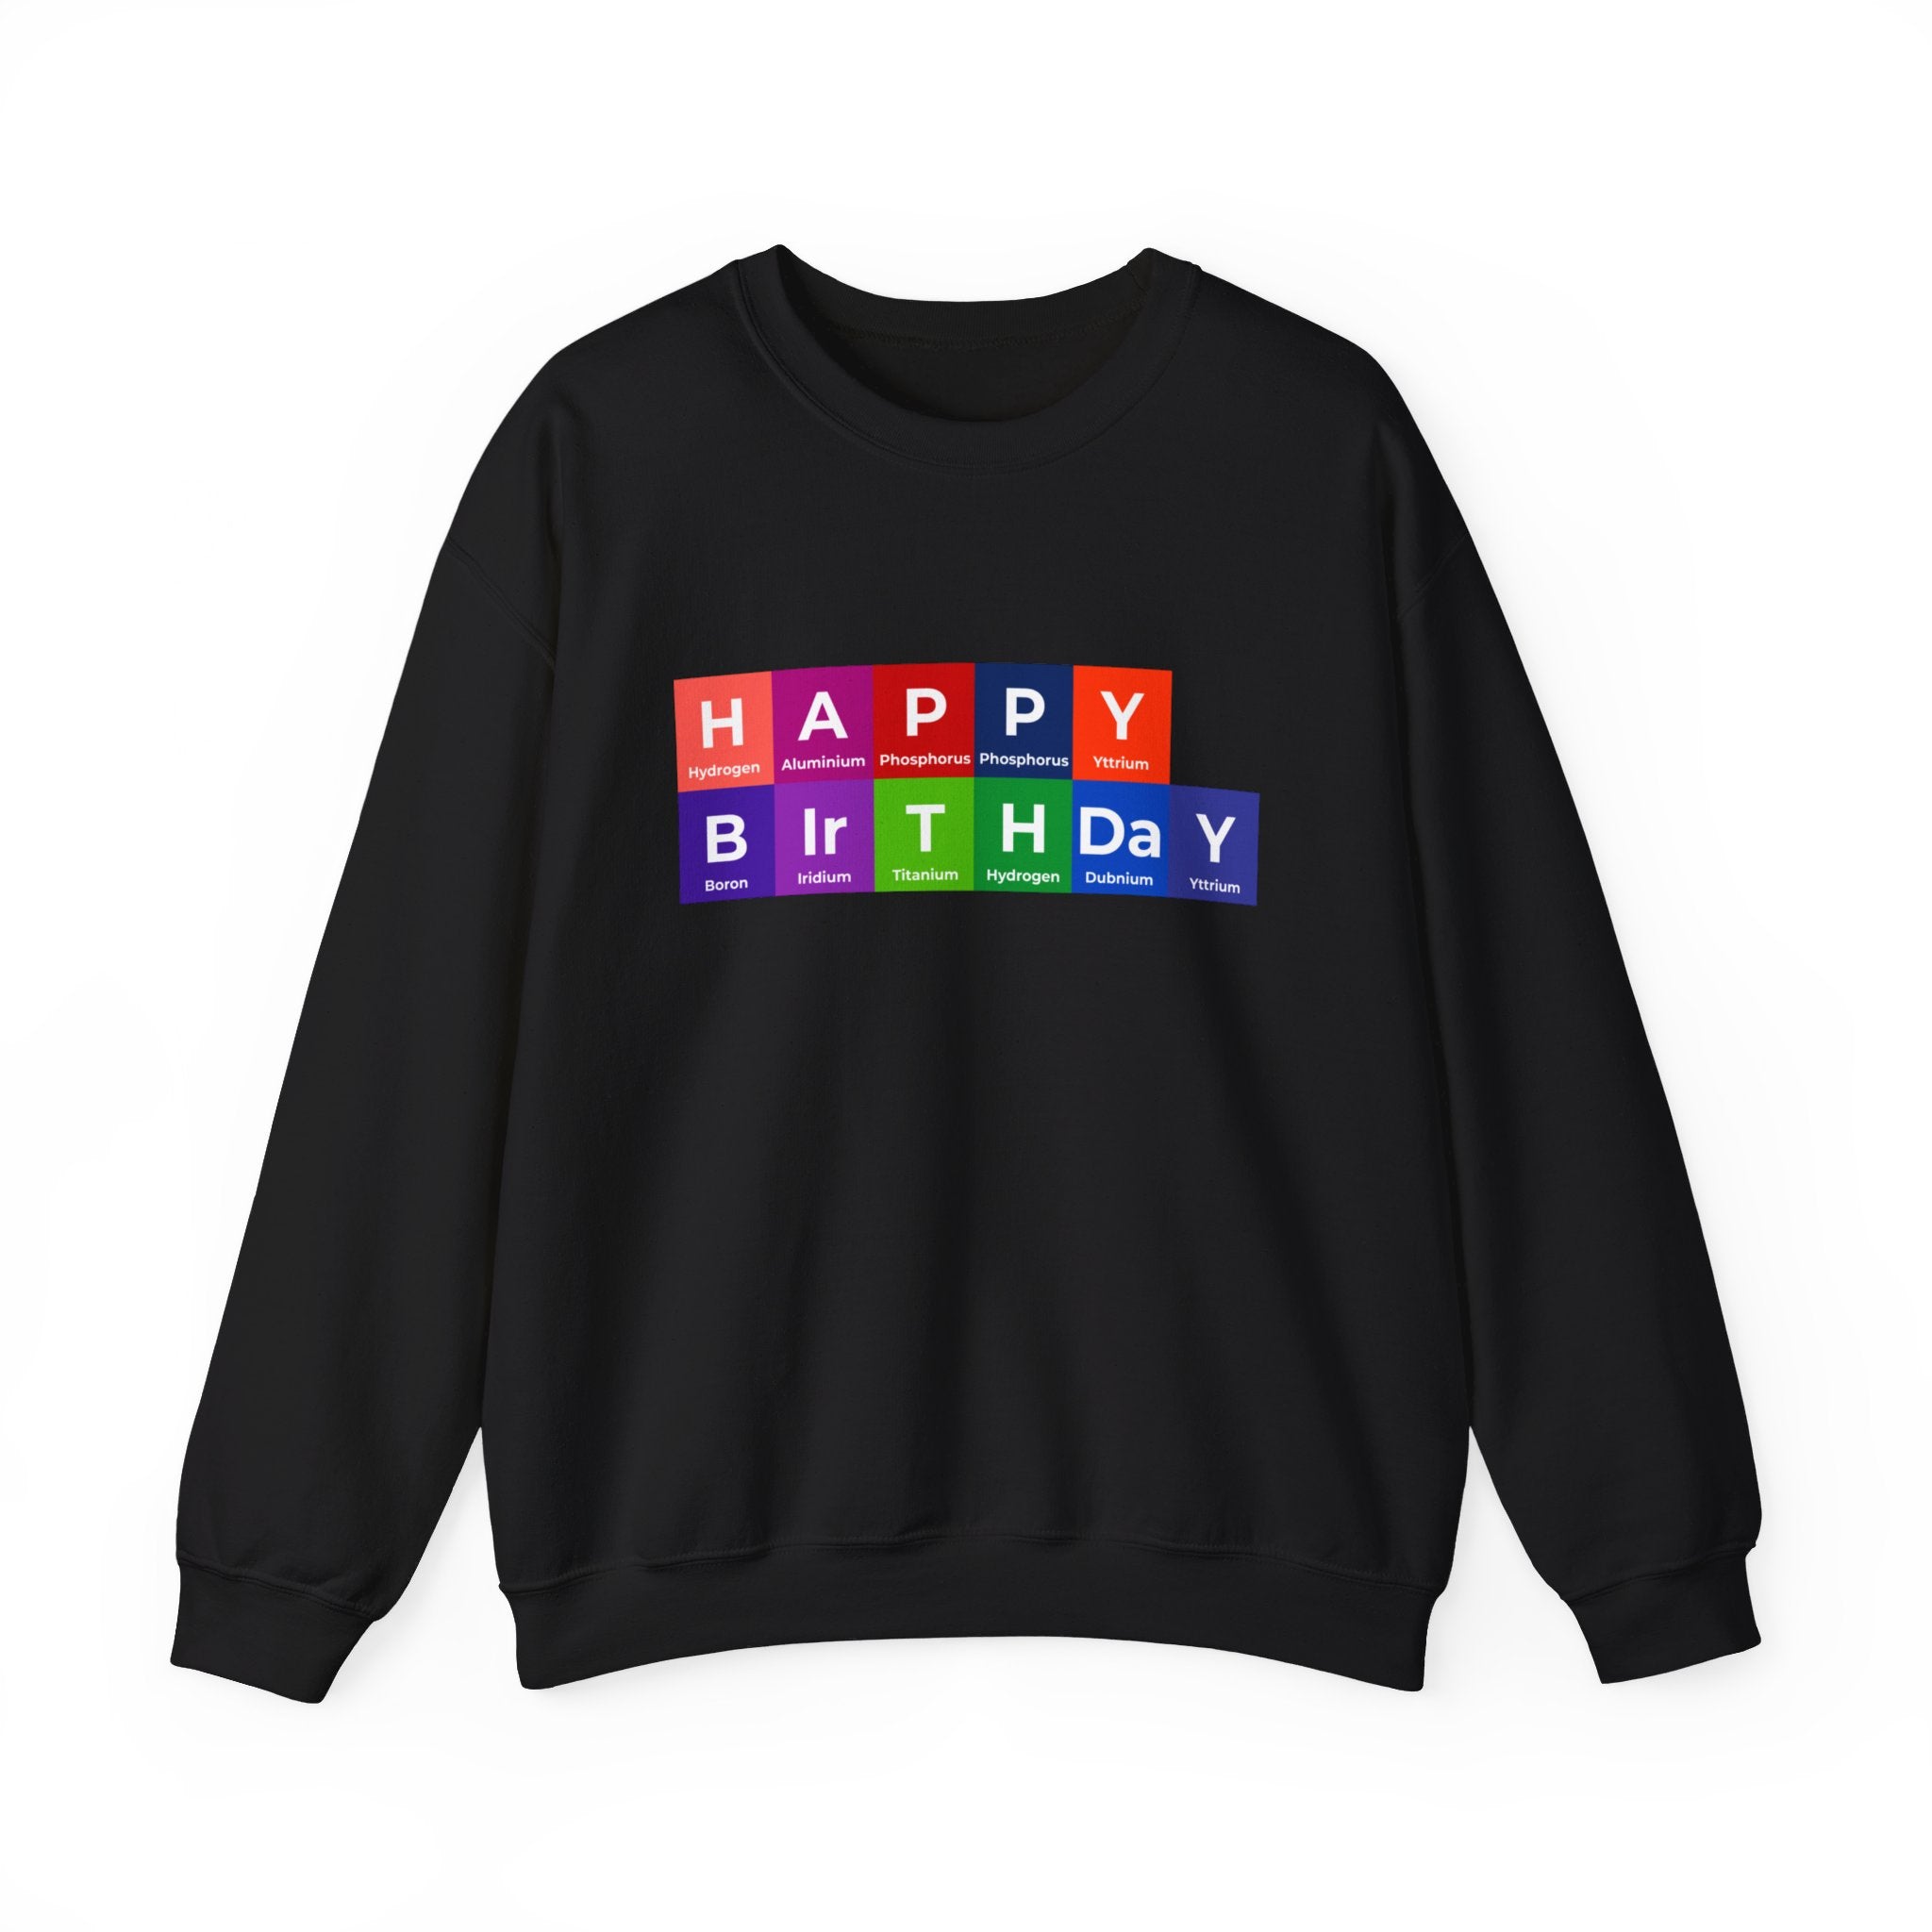 A Happy Birthday - Sweatshirt, cozy and black, adorned with "Happy Birthday" spelled out using periodic table elements on the front, perfect for birthday warmth and celebration.